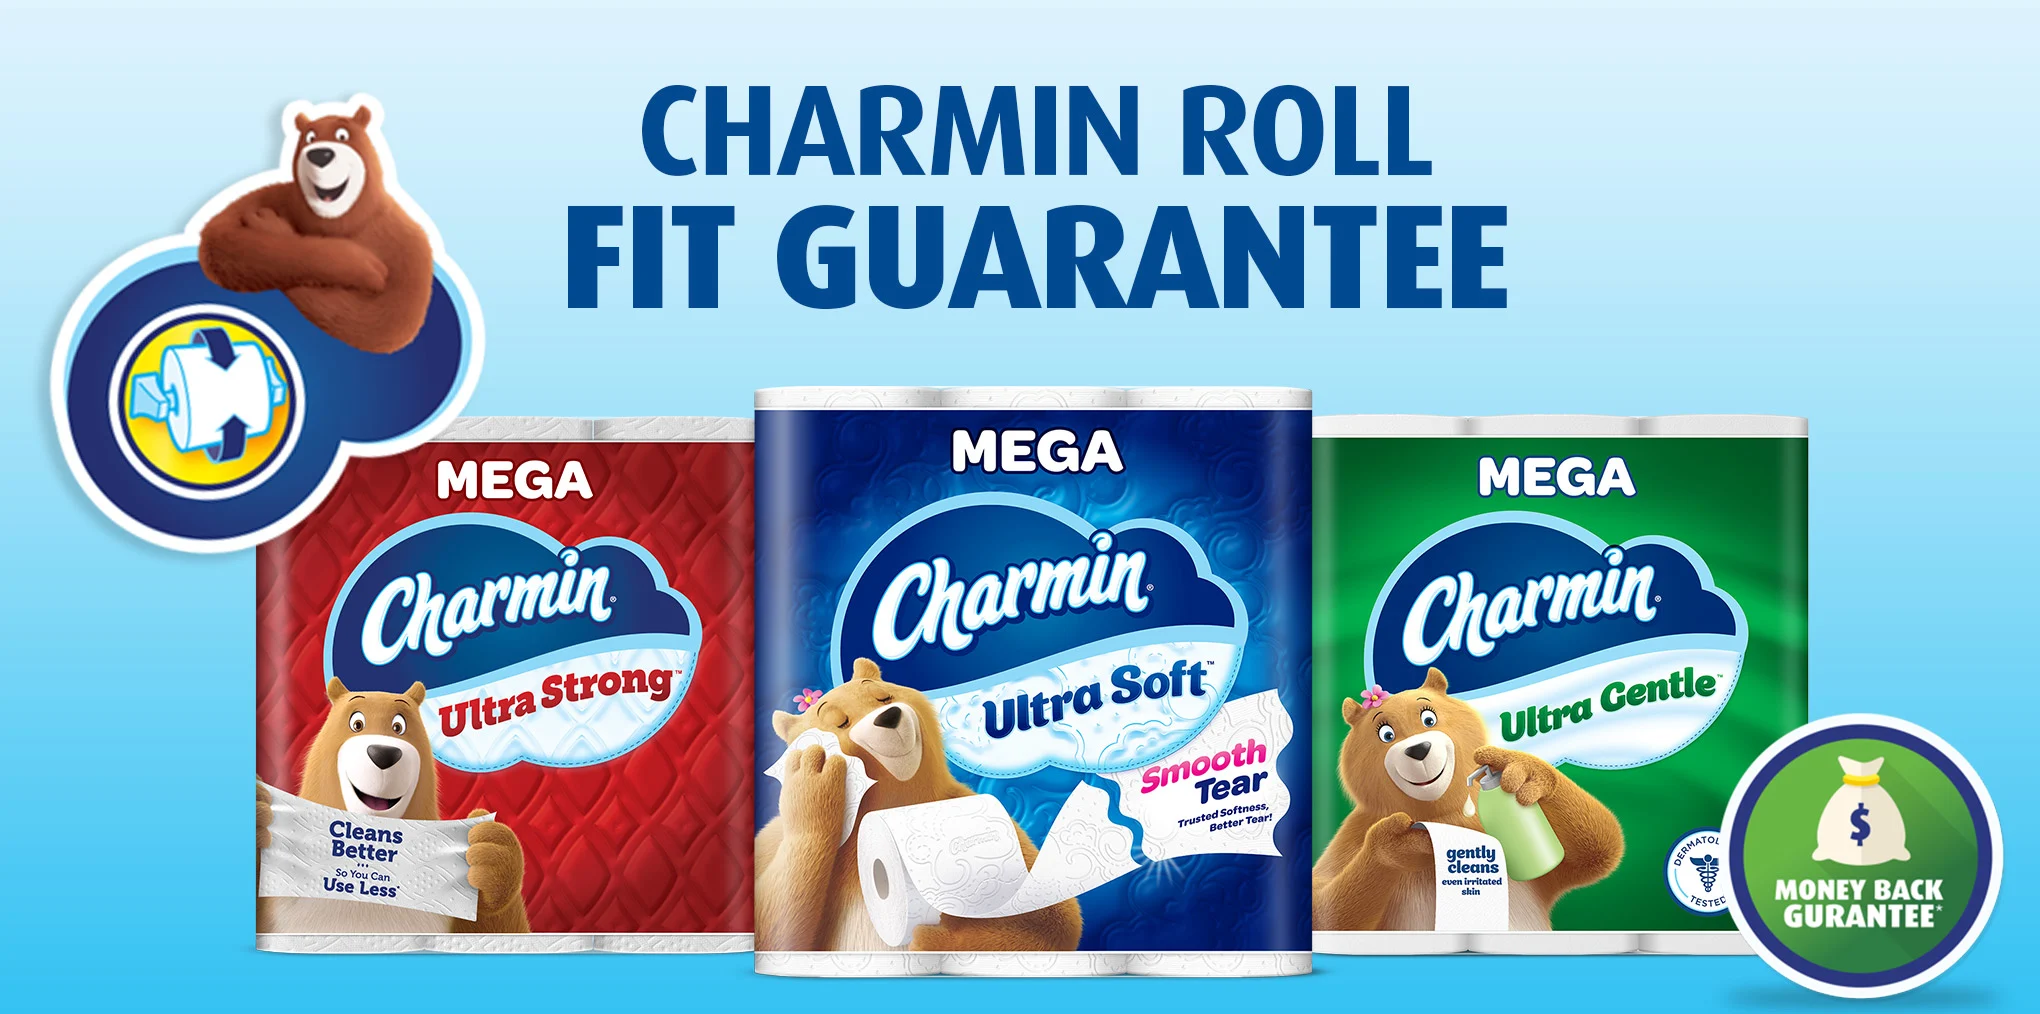 Leonard bear above roll-fit guarantee icon next to Charmin Ultra Strong, Ultra Soft, and Ultra Gentle Mega packs